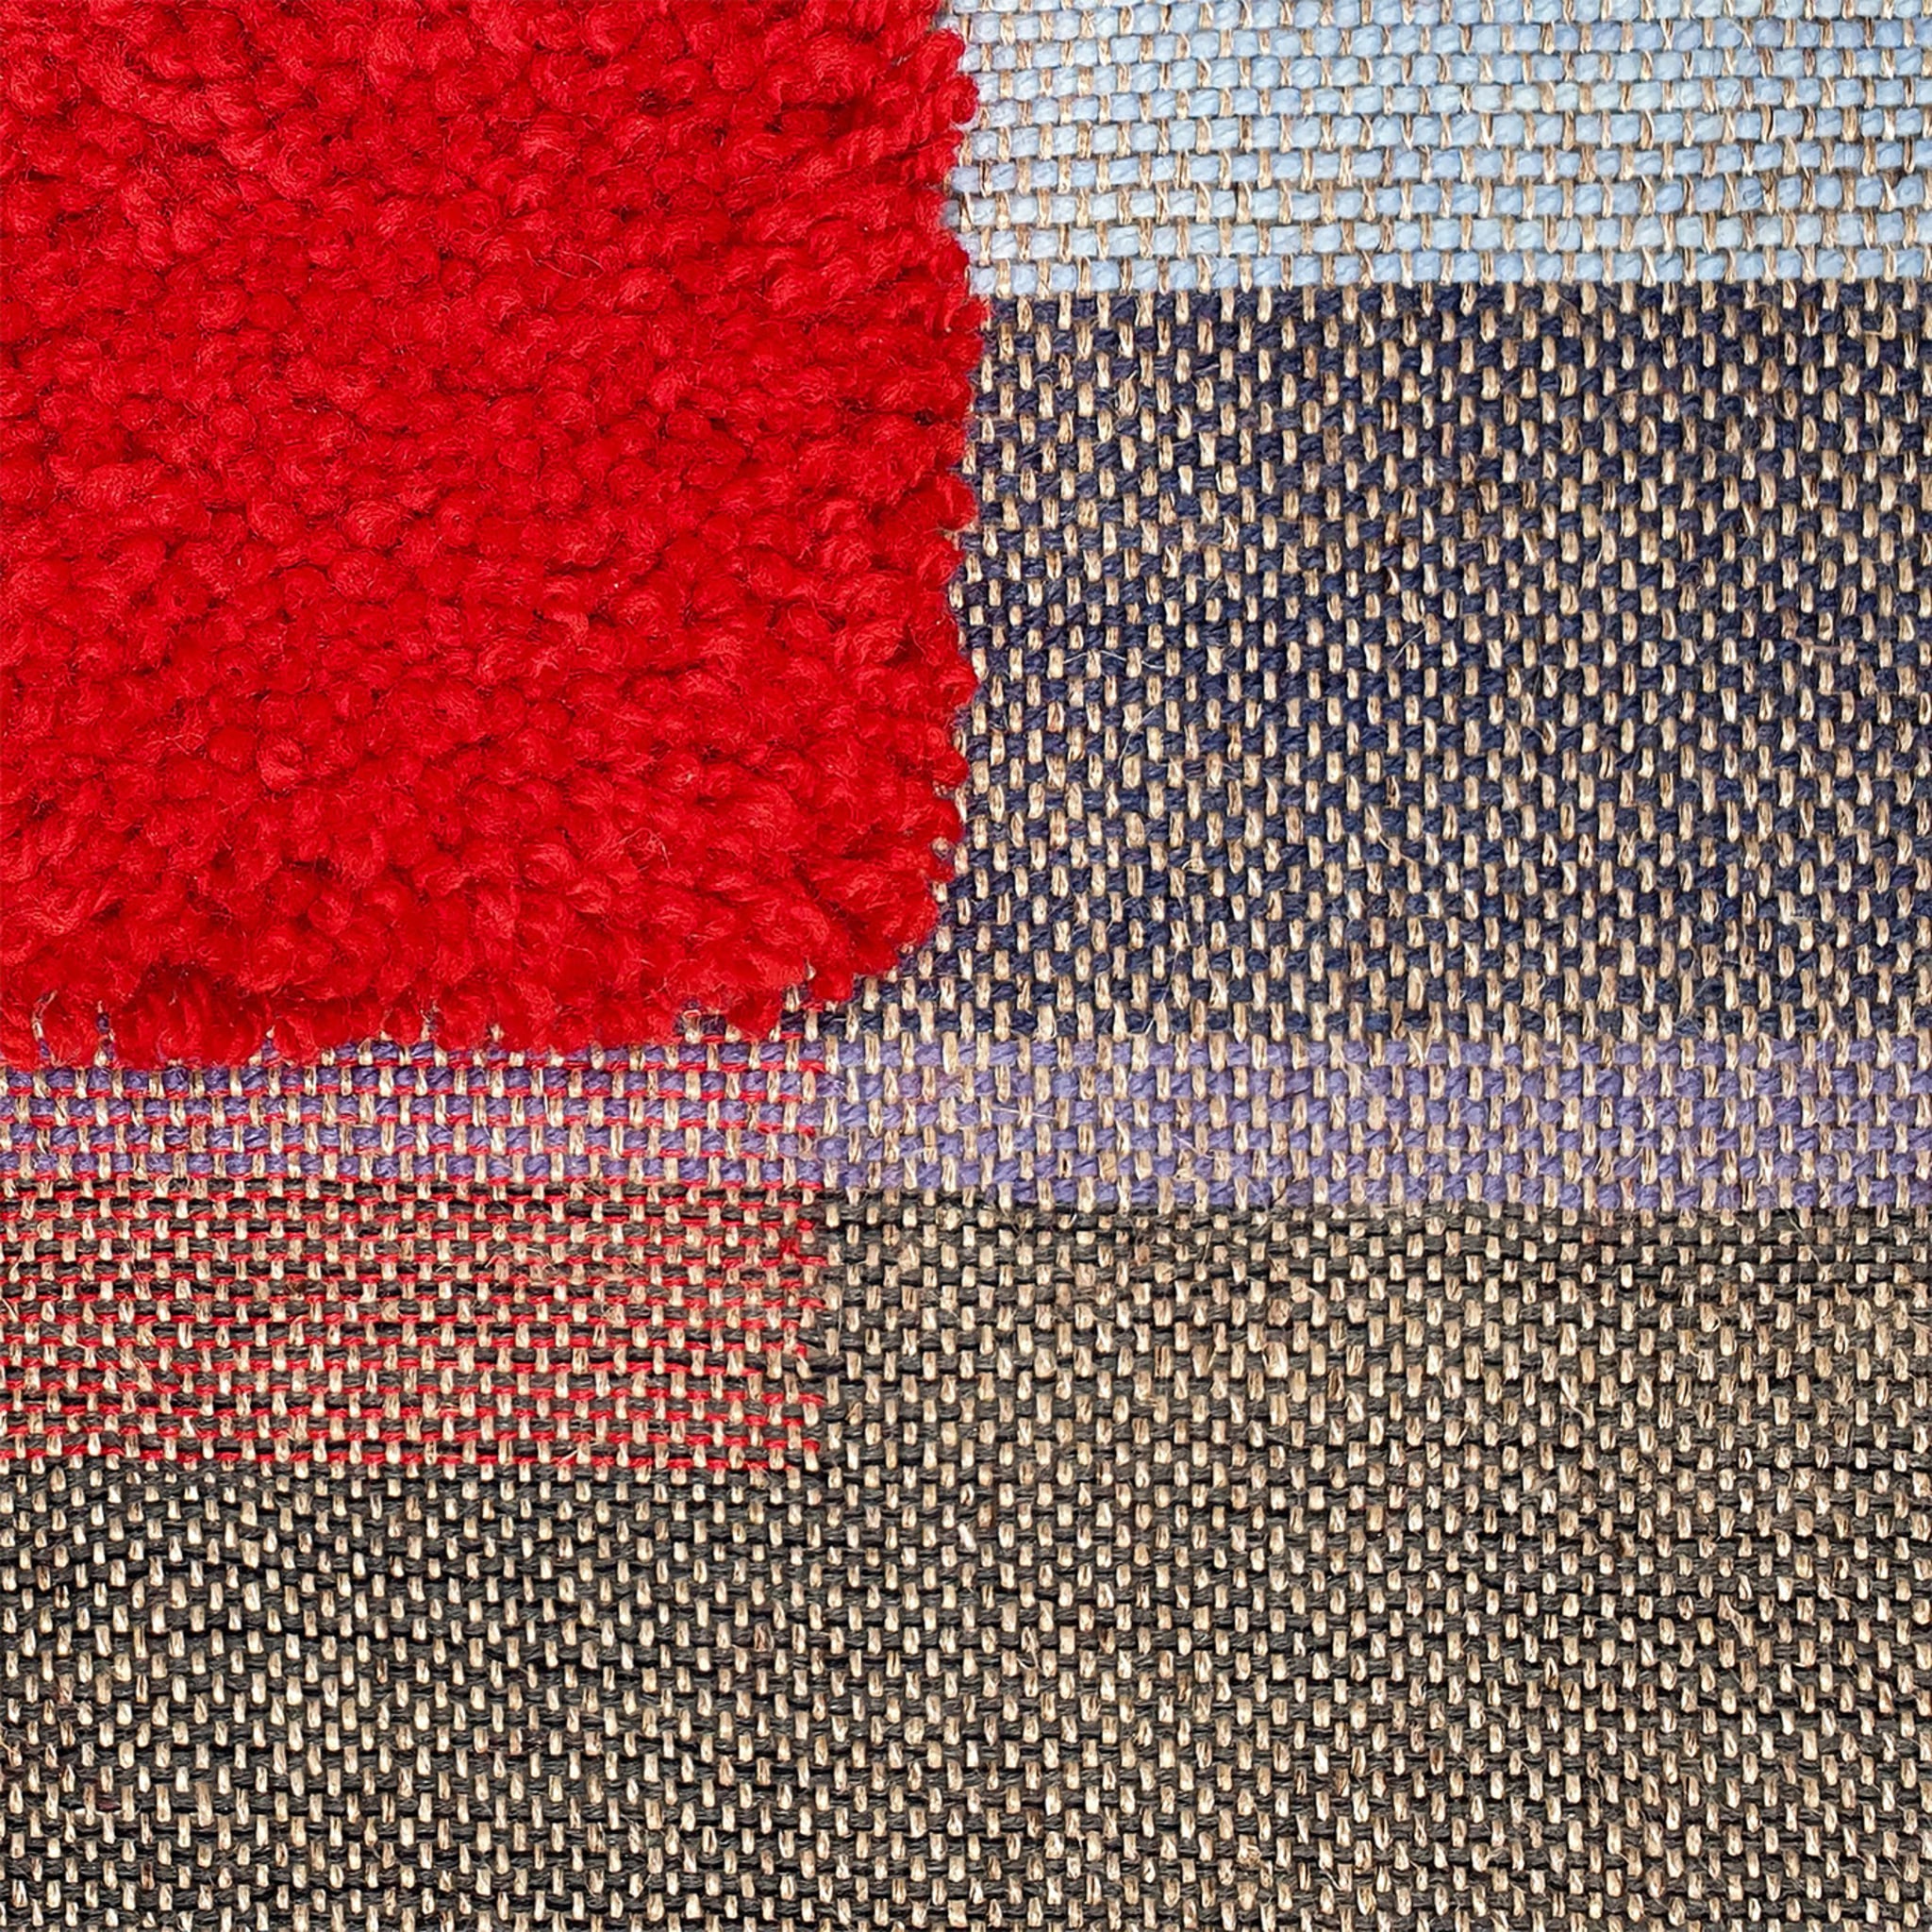 Rosso Flag Hand Woven Panel - Alternative view 1